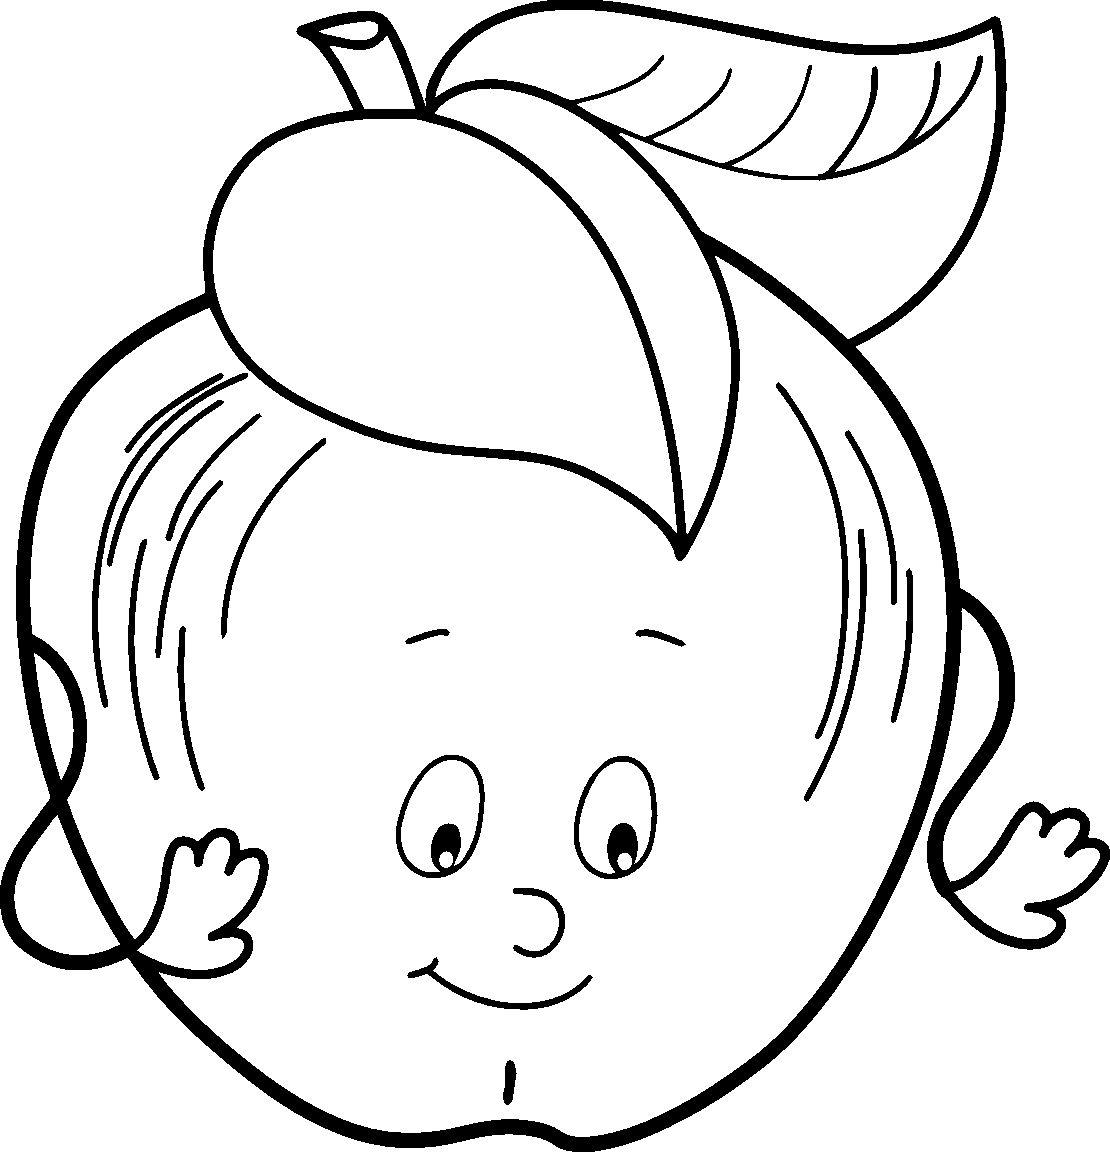 Smiling Apple Coloring Page